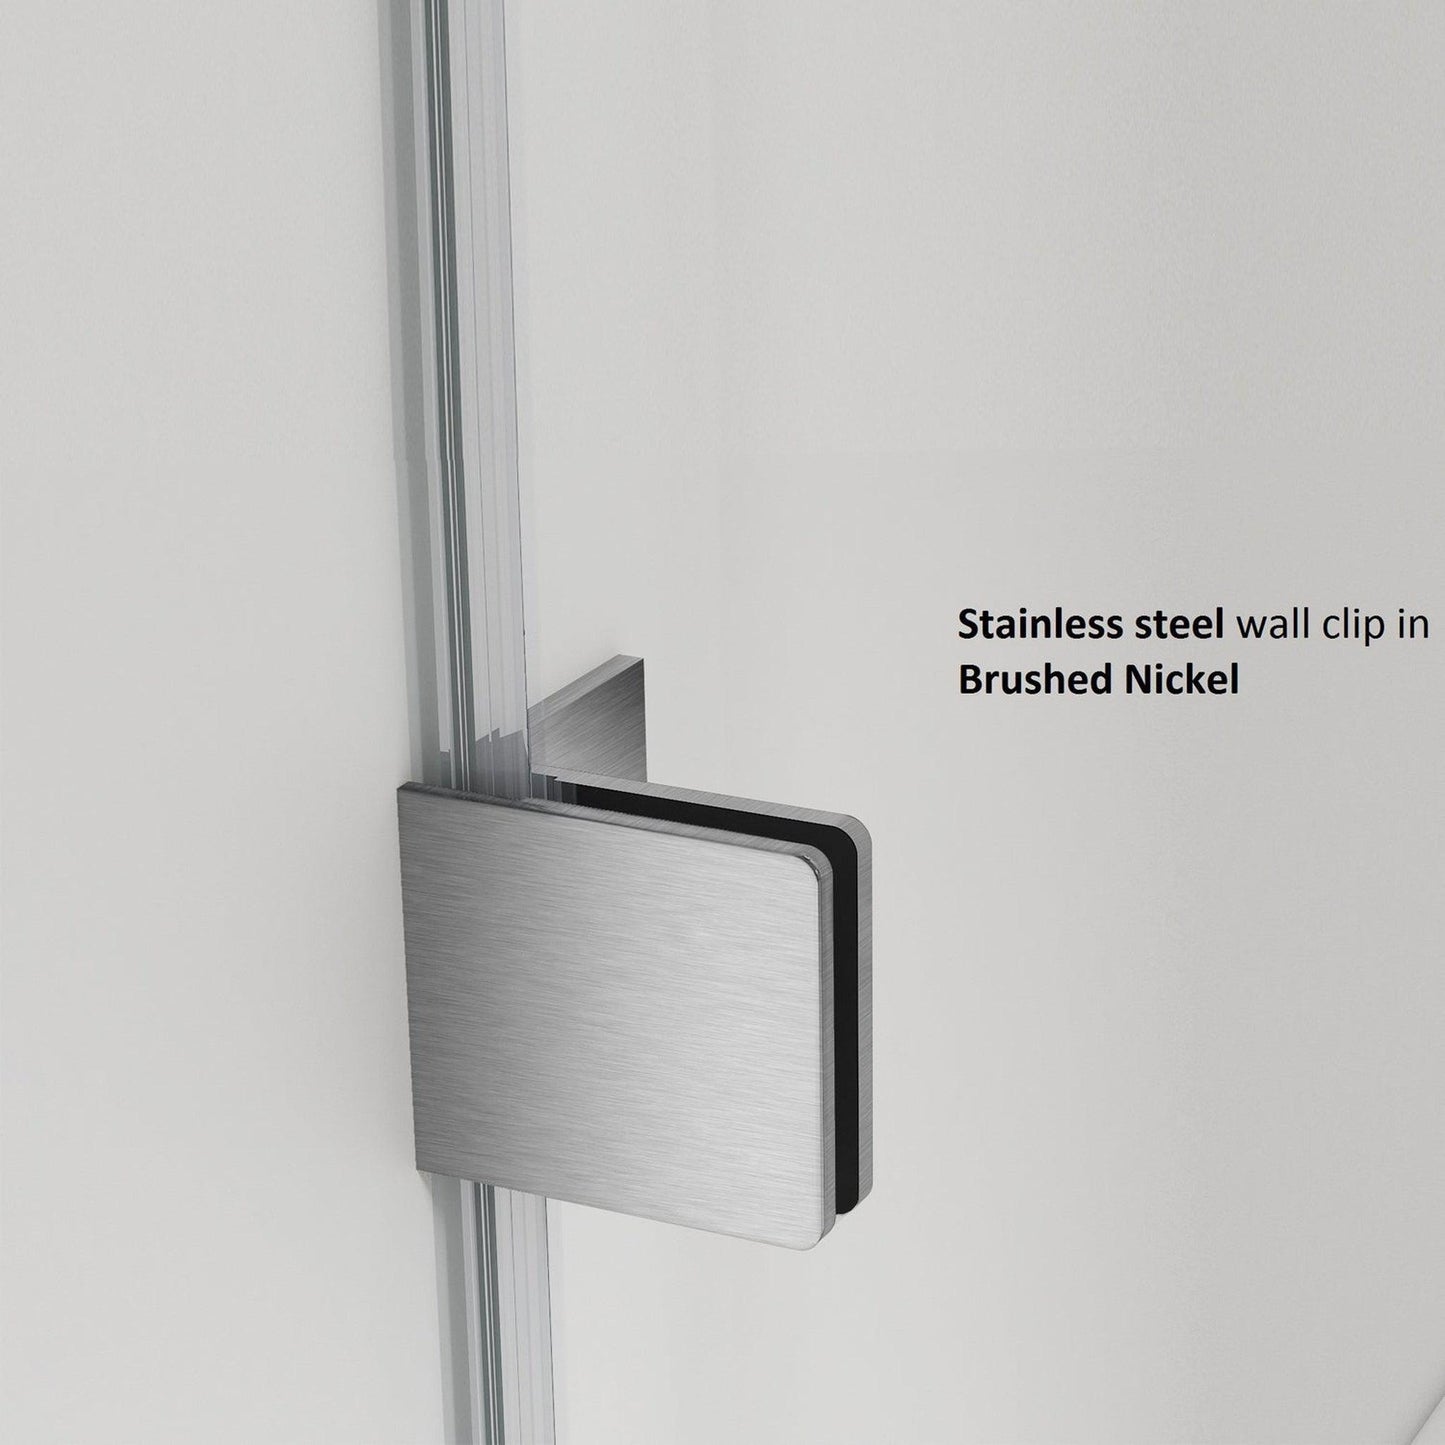 Vinnova Milano 48" x 72" Brushed Nickel In-line Hinged Frameless Shower Door With Fixed Glass on Both Sides